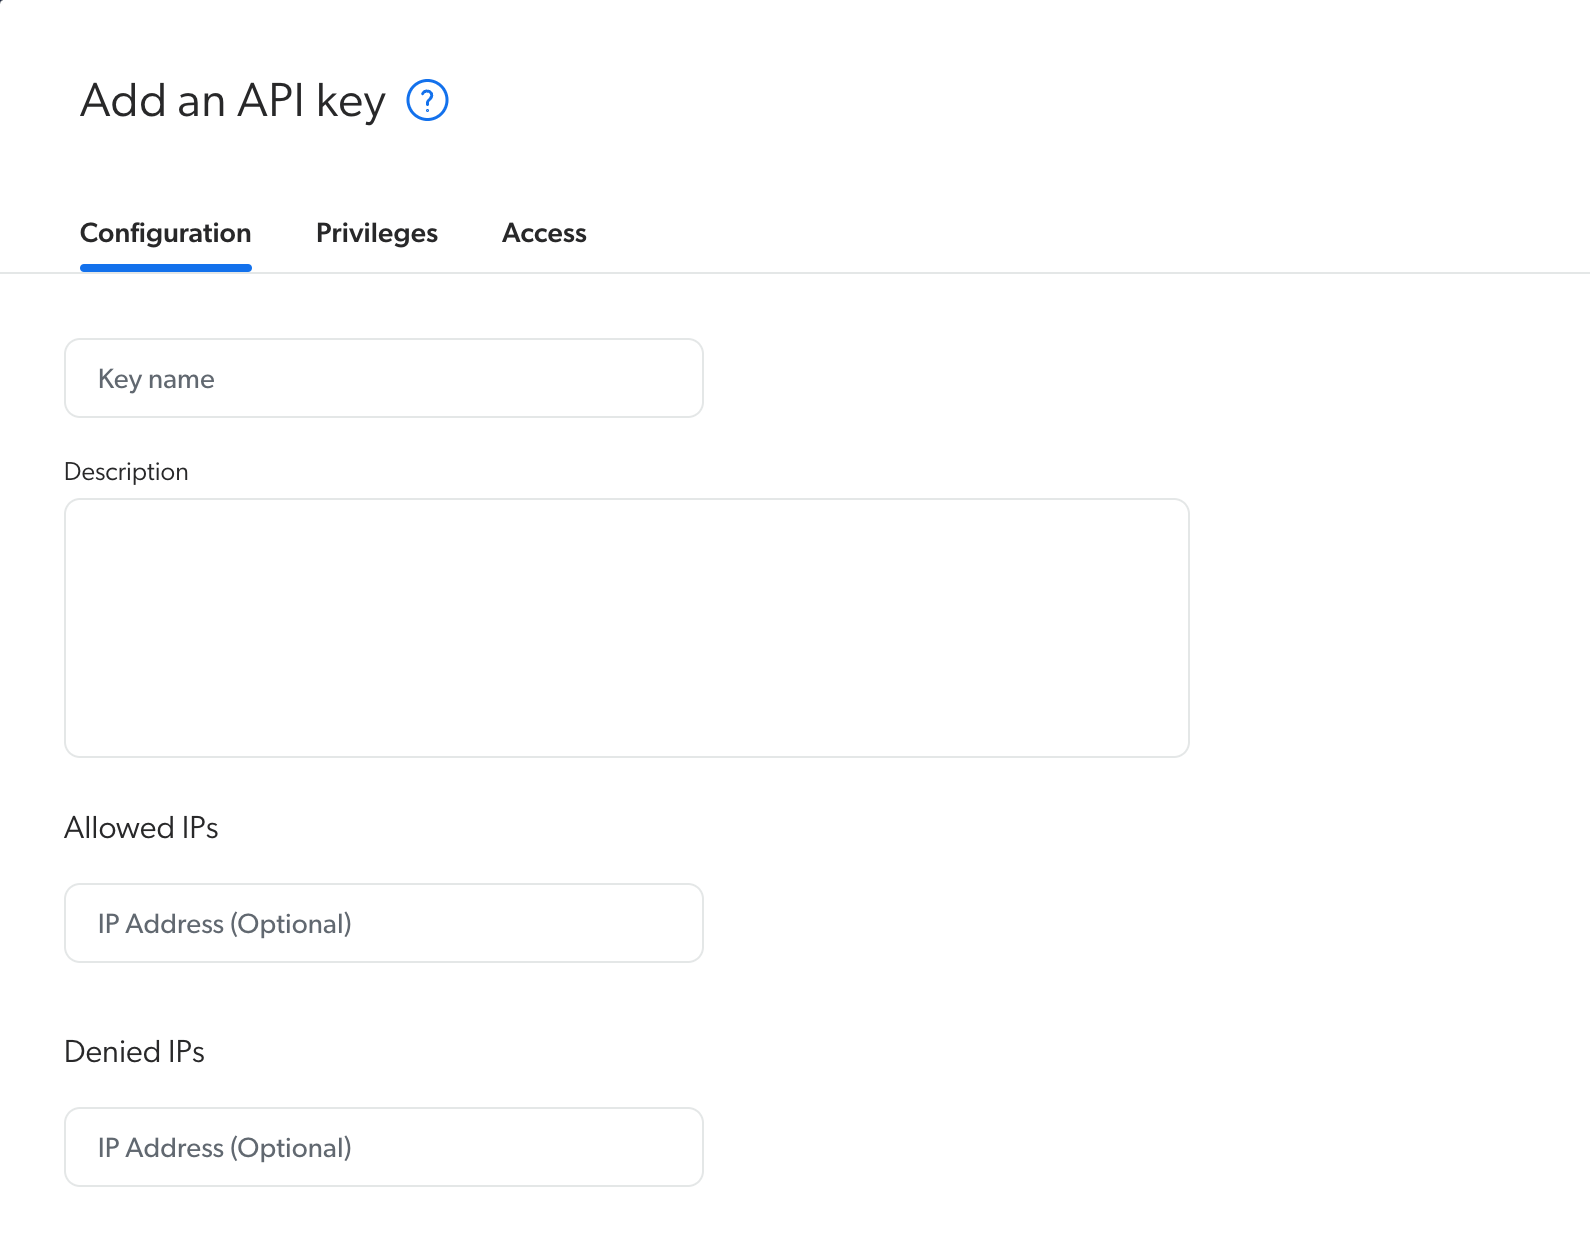 Add an API key dialog in Coveo. The configuration tab is selected. It has a key name field, description field, Allowed IPs field, and Denied IPs field. There is also a privileges tab and and access tab.